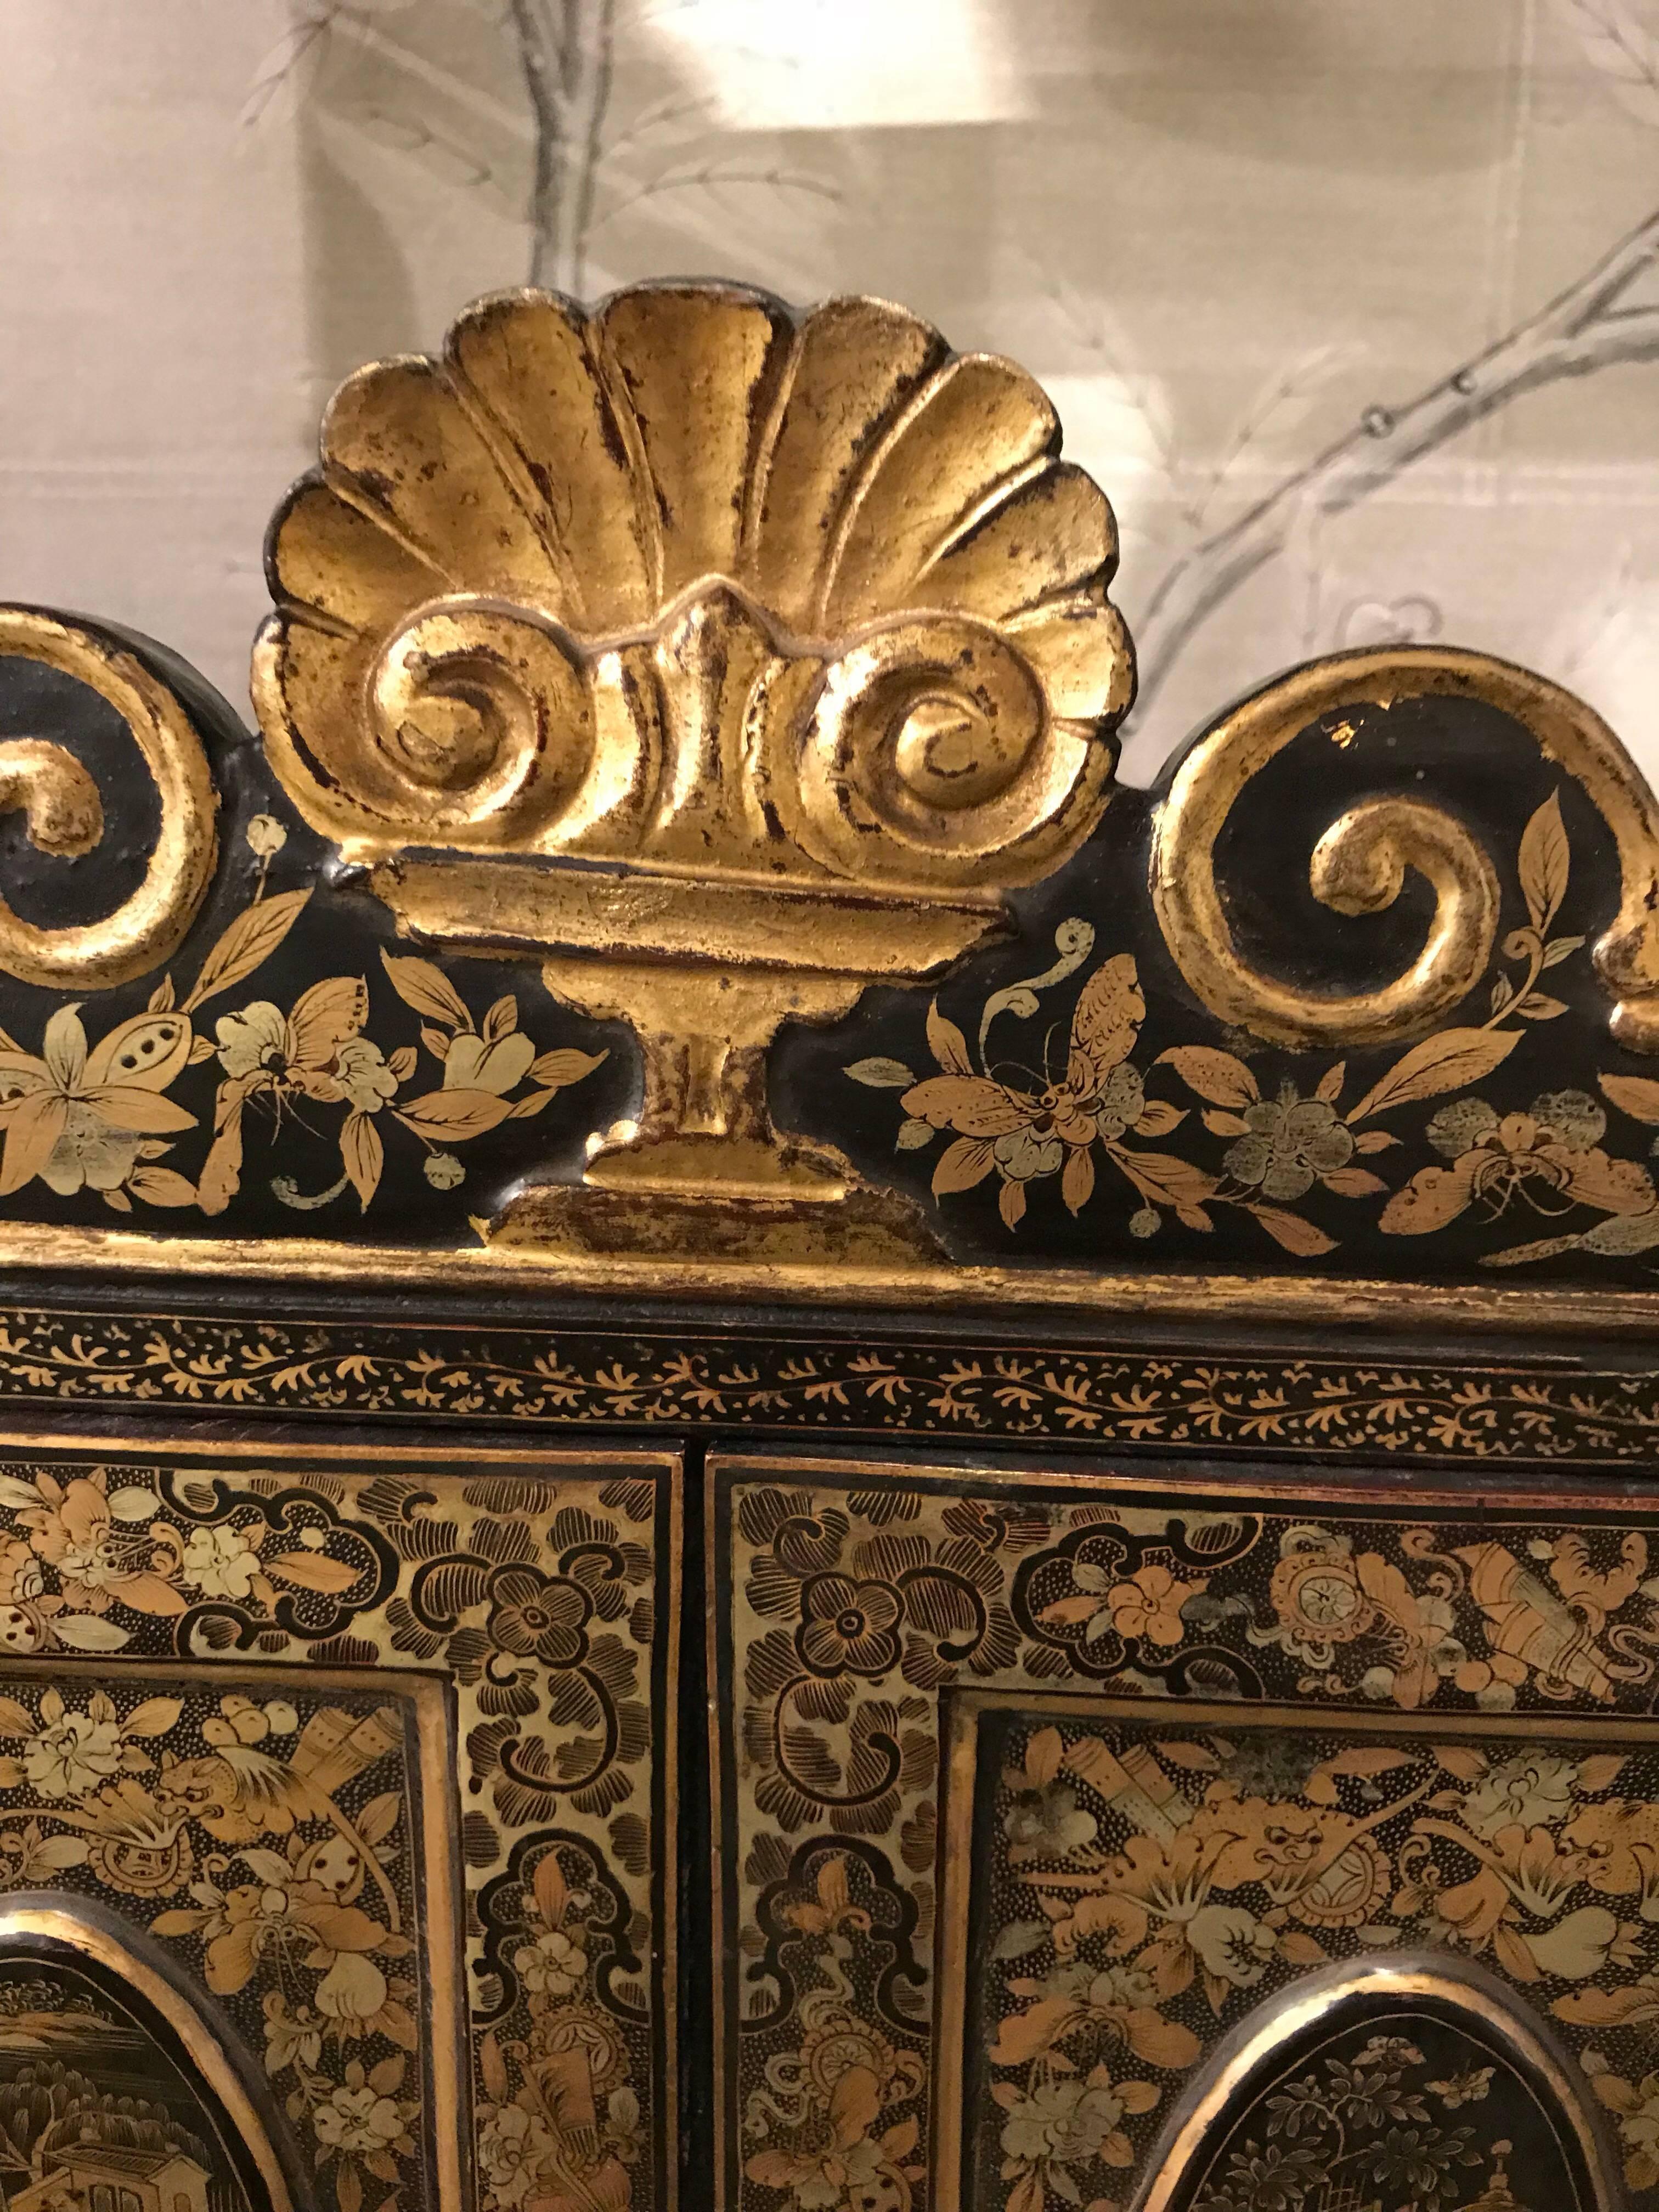 A small 19th century Chinese black lacquer export style cabinet.

With detailed landscape design and interior drawers.

Hand-painted design in gold.